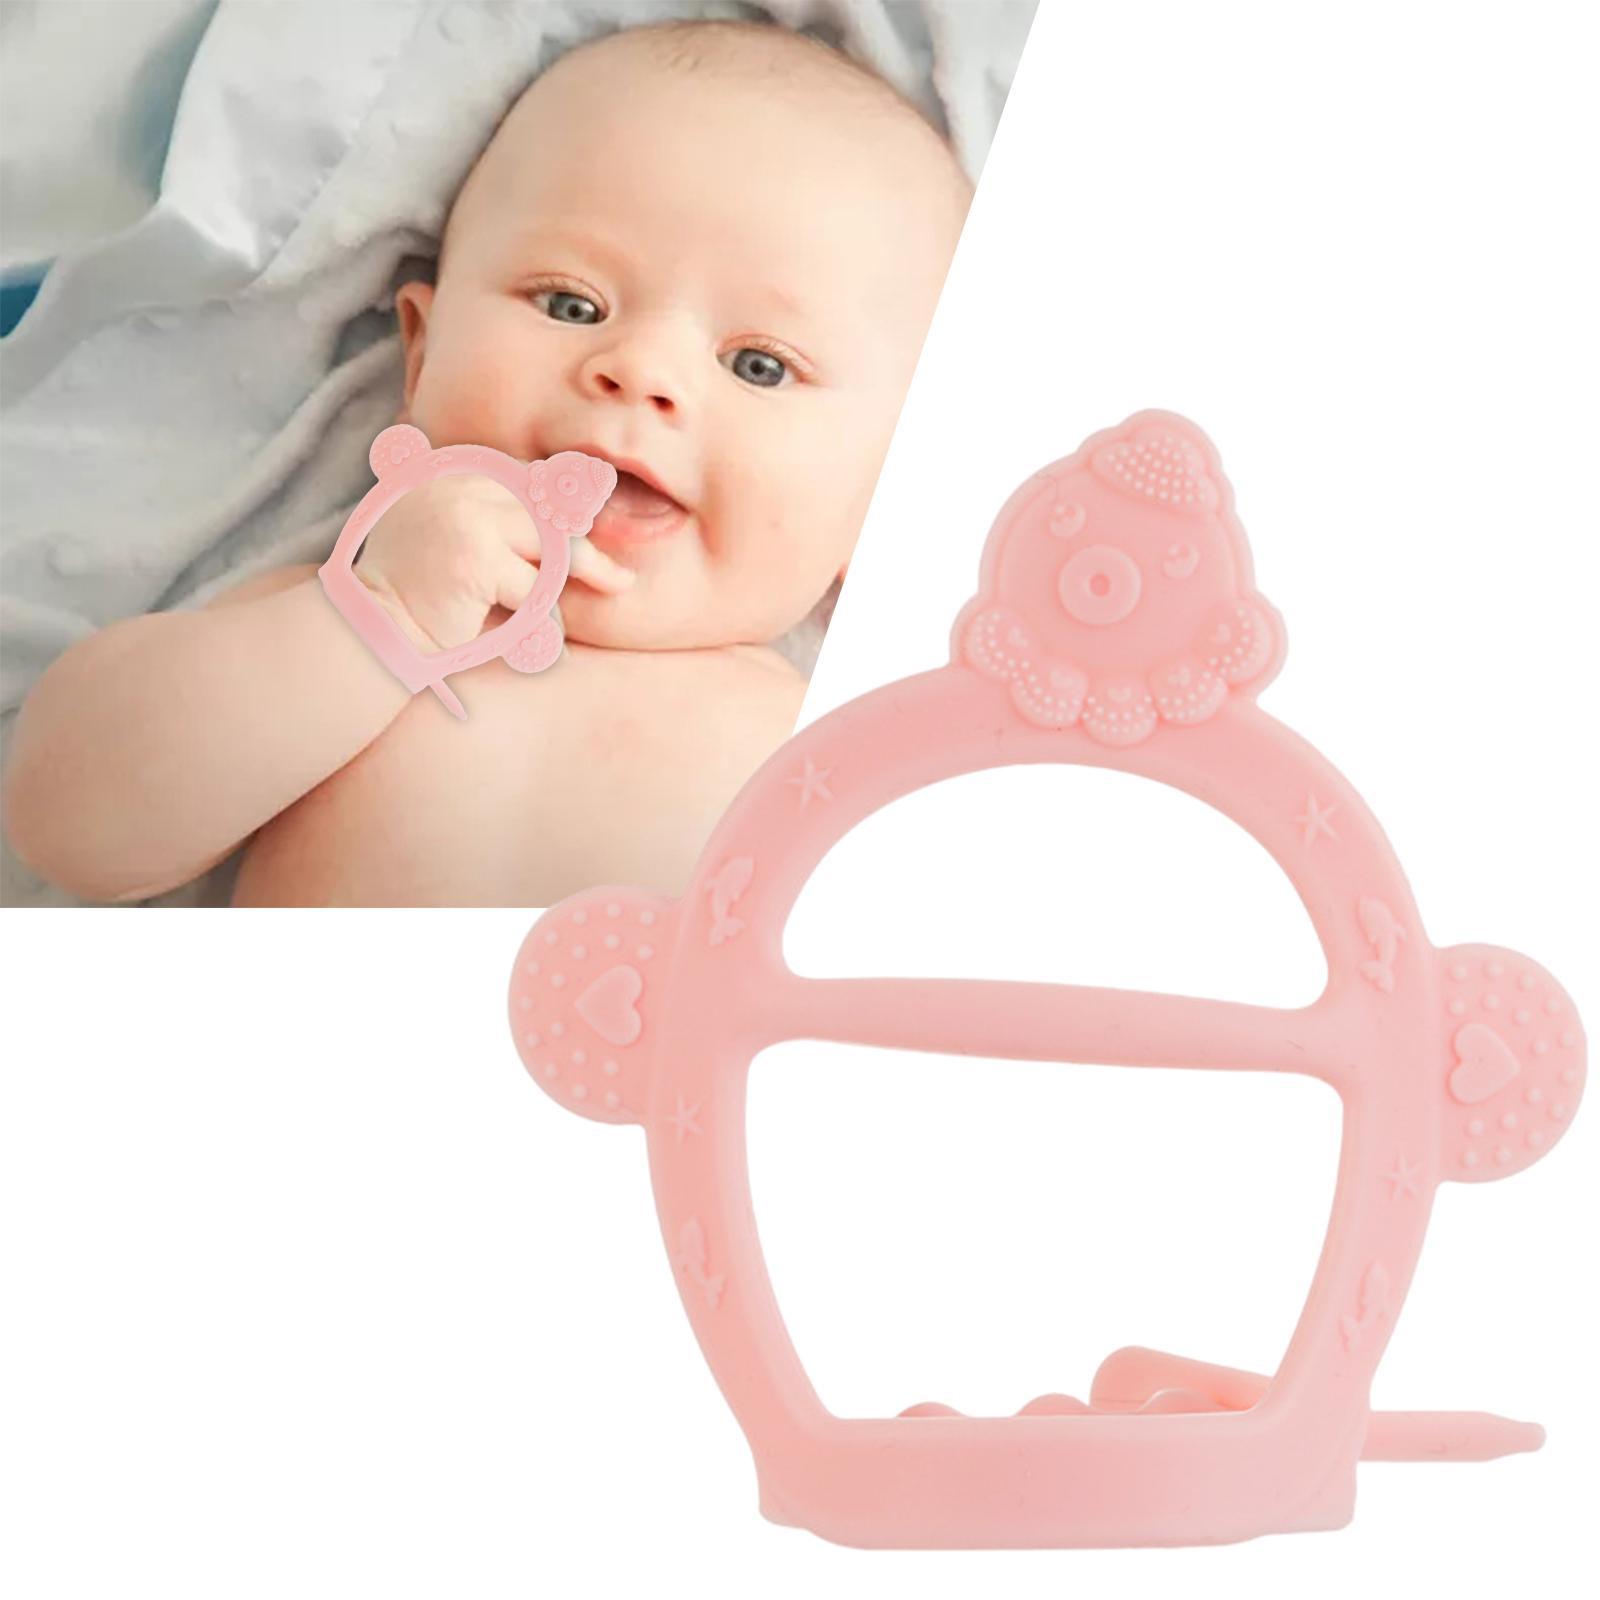 Baby Teething Toys Food Grade Silicone Soothing Teething for Babies Infants Pink